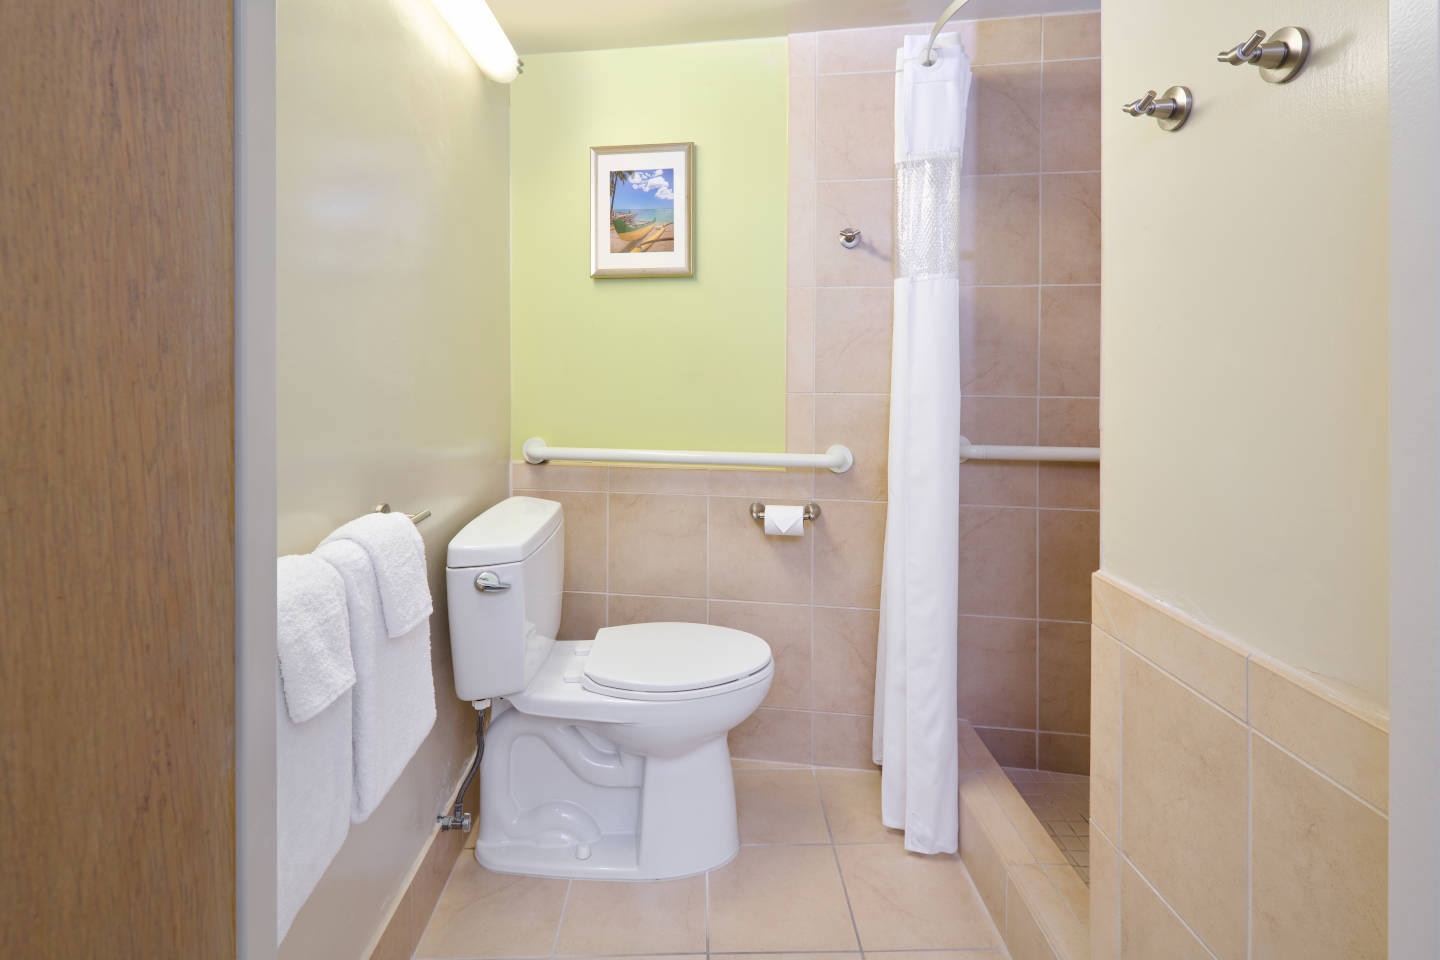 Standard Hotel Room with Accessible Bathroom